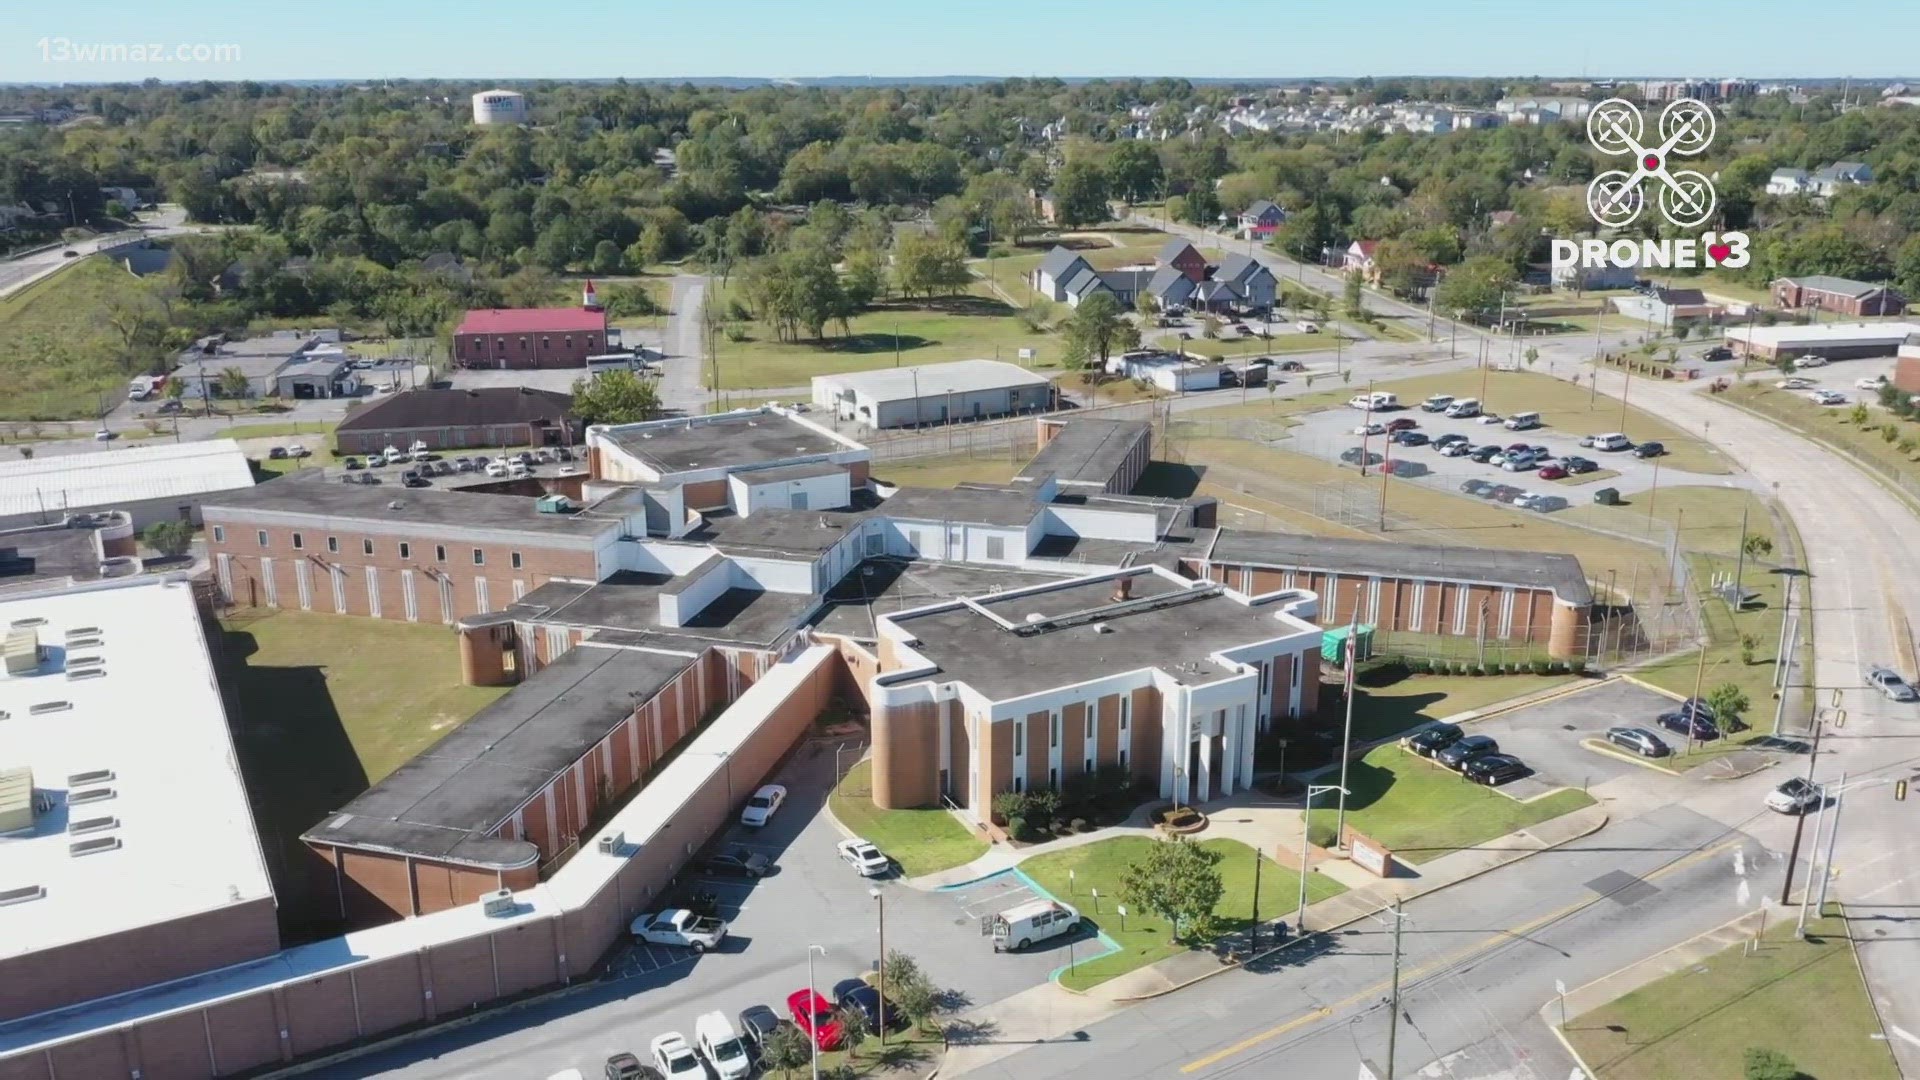 The funds will help purchase "additional magnetic locks and other improvements to the jail," according to the agenda released by the county.